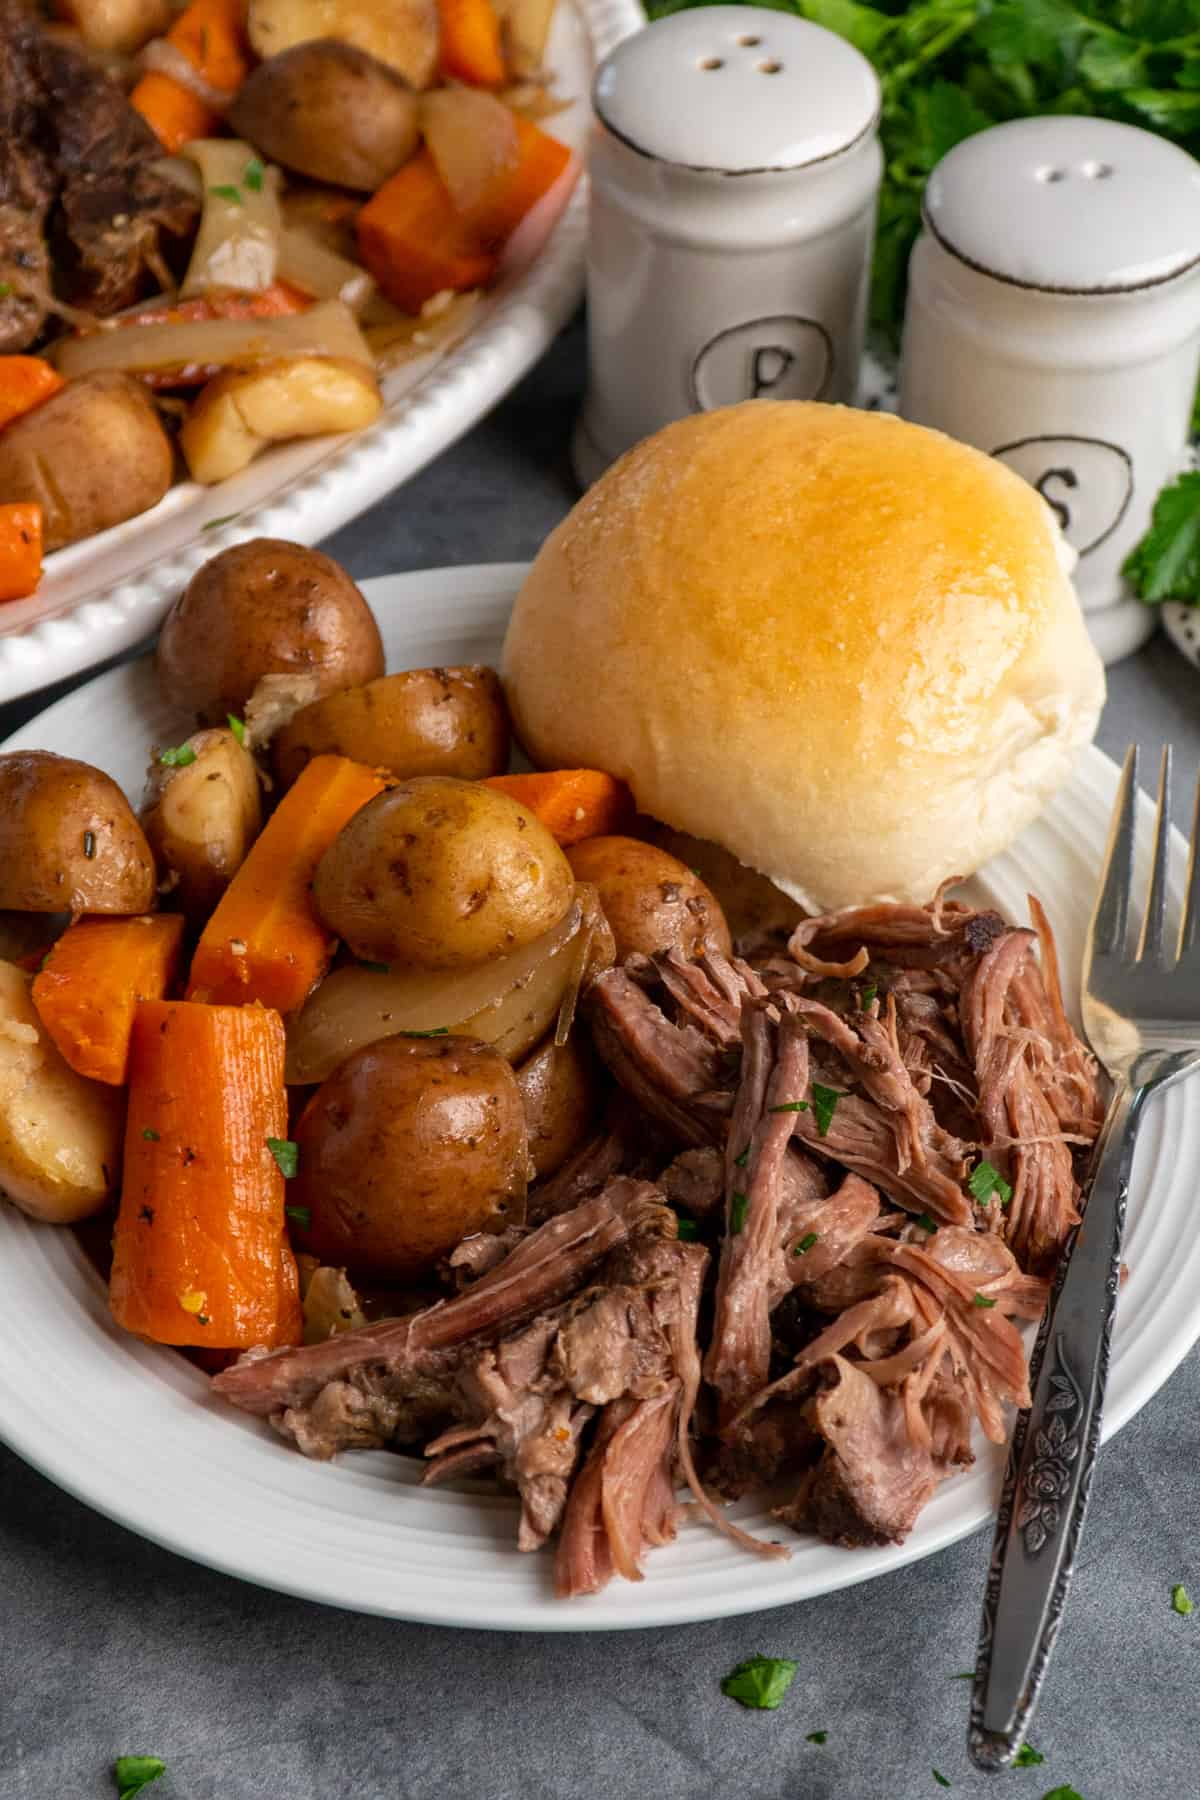 Shredded beef roast on a plate with a roll and vegetables.